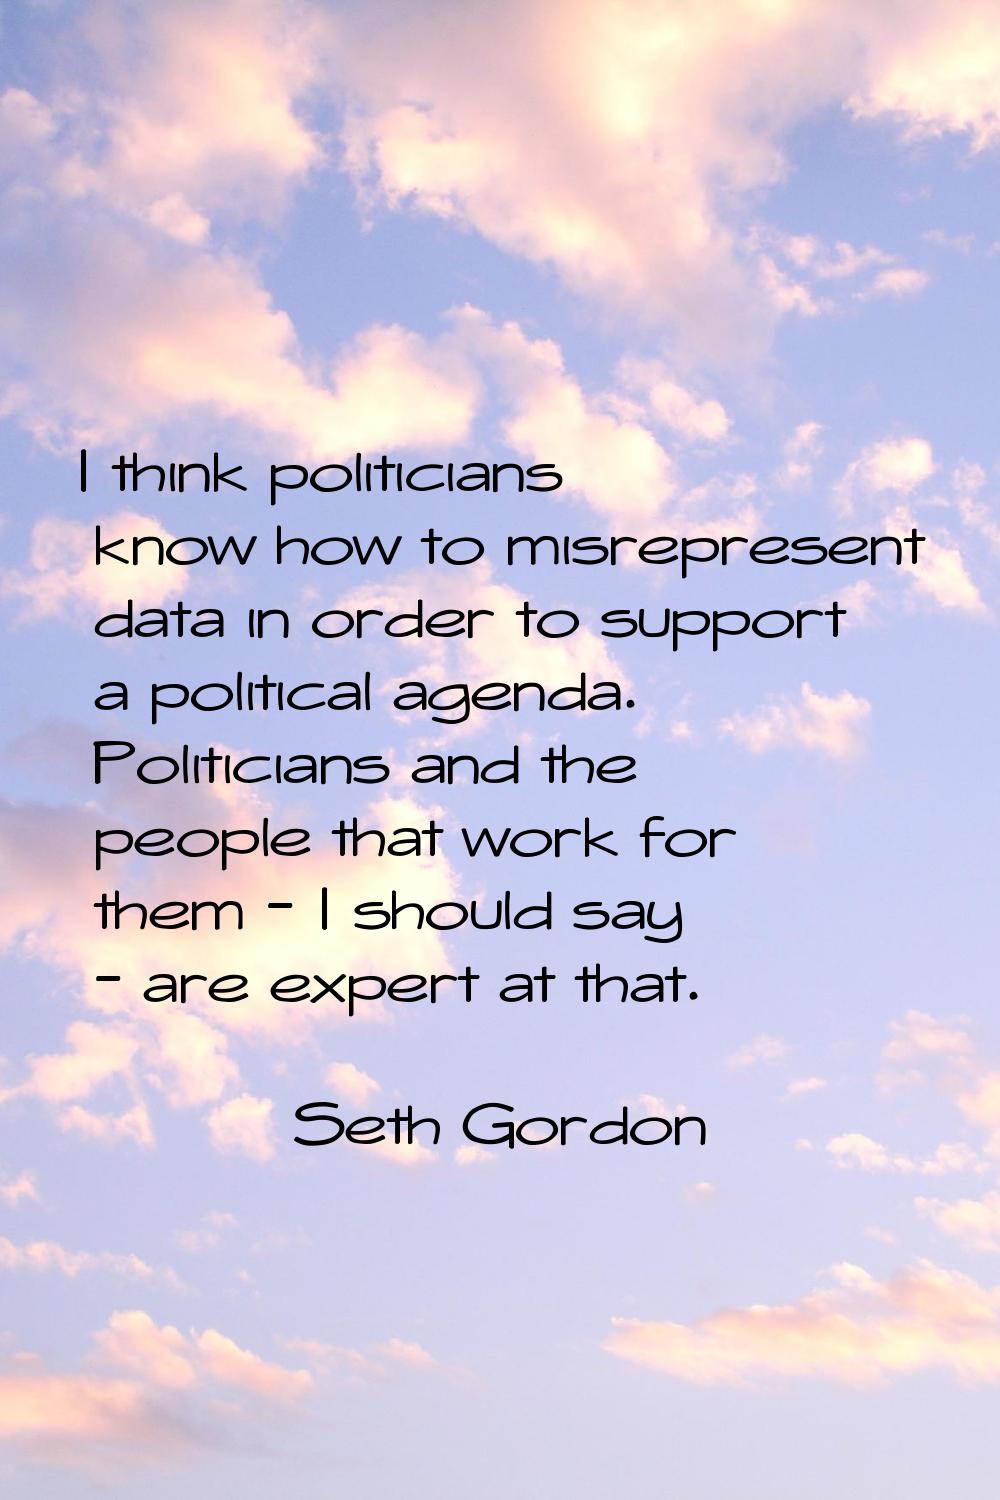 I think politicians know how to misrepresent data in order to support a political agenda. Politicia